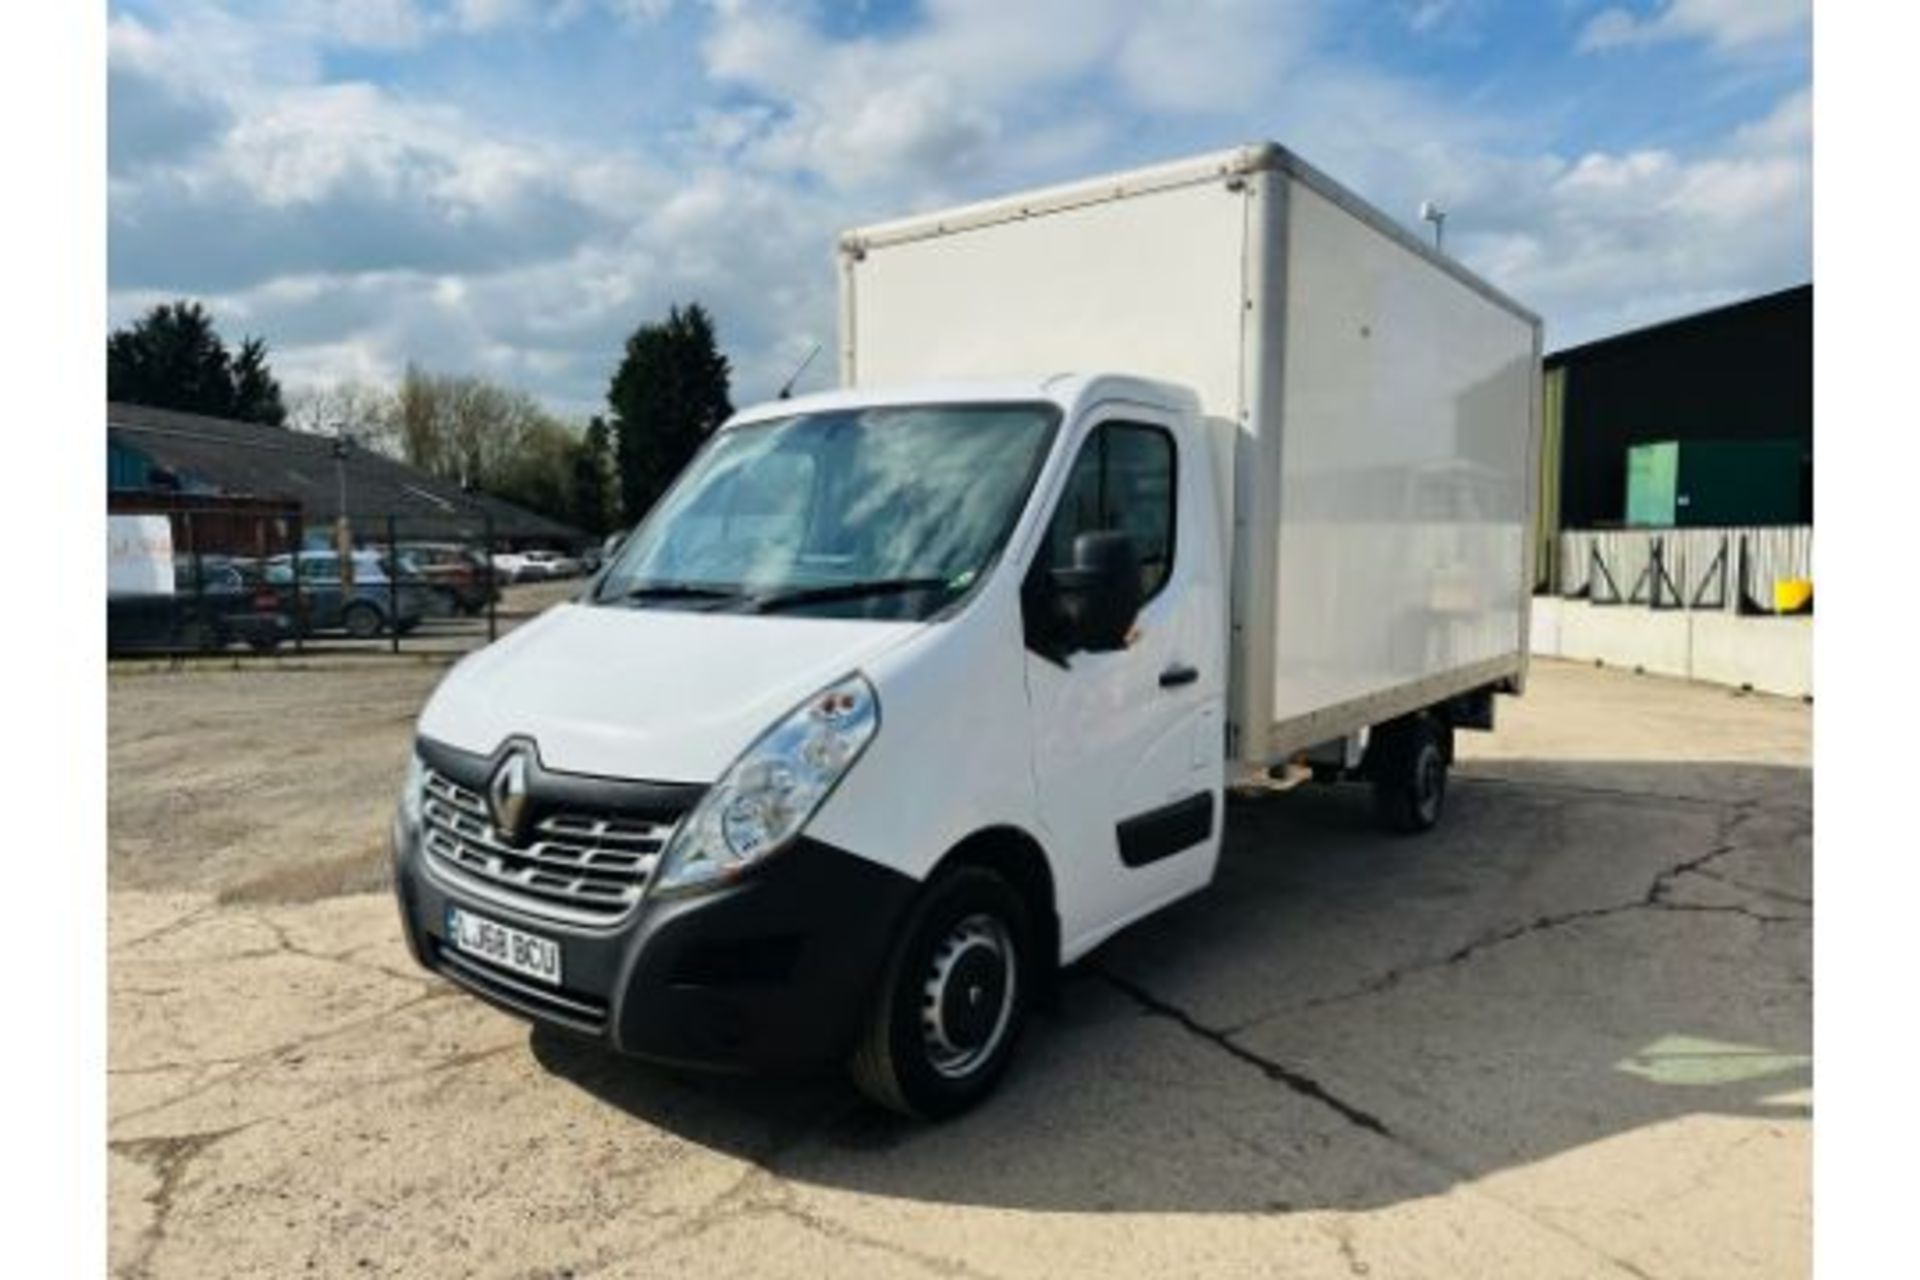 Reserve Met -RENAULT MASTER 2.3DCI (130) Business Edition Lwb Box Van With Electric Tail Lift 68 Reg - Image 3 of 27